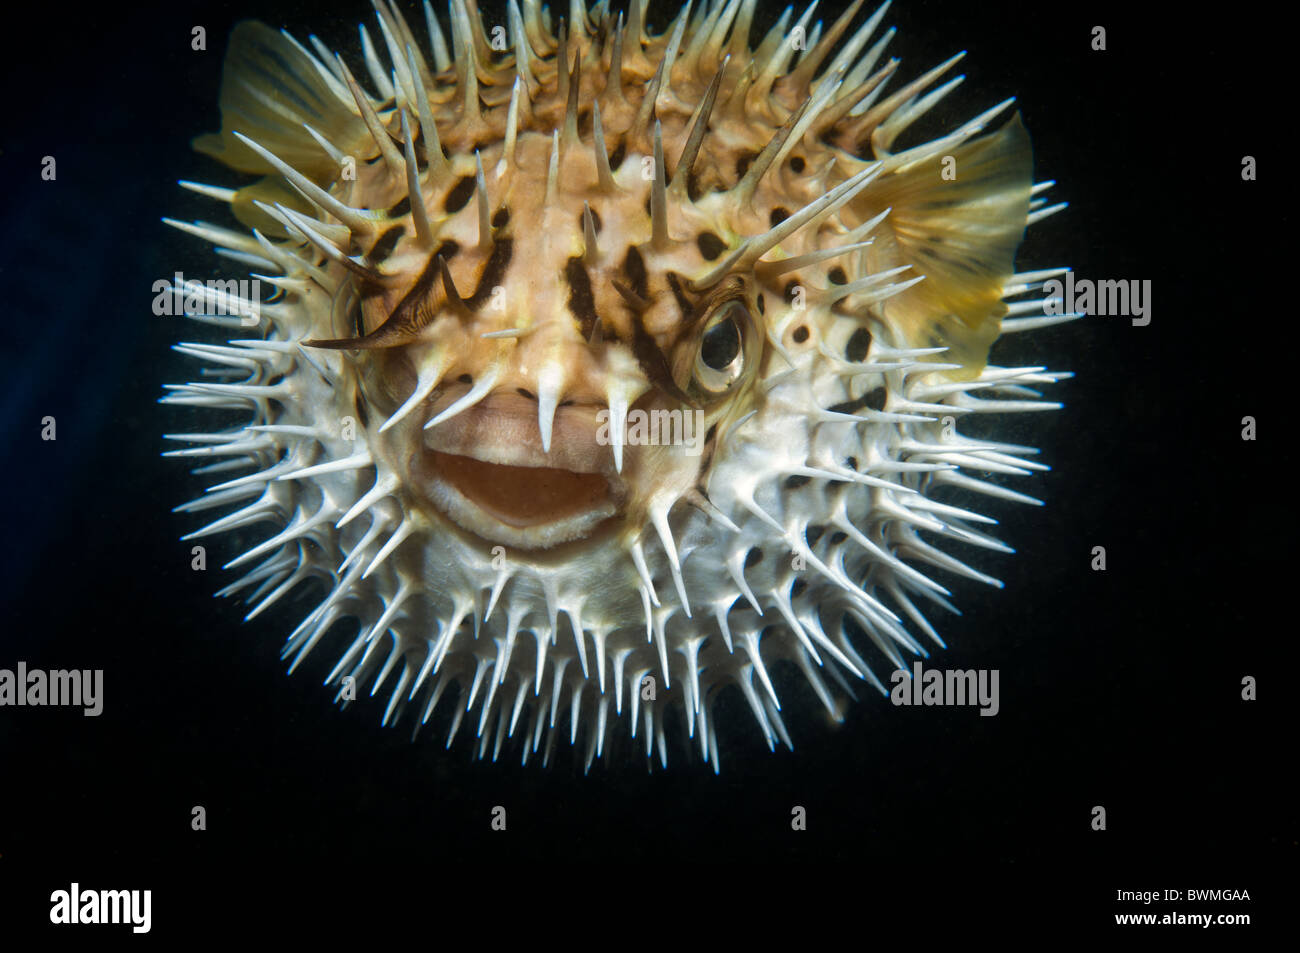 Close up of a puffed up Balloonfish. Stock Photo